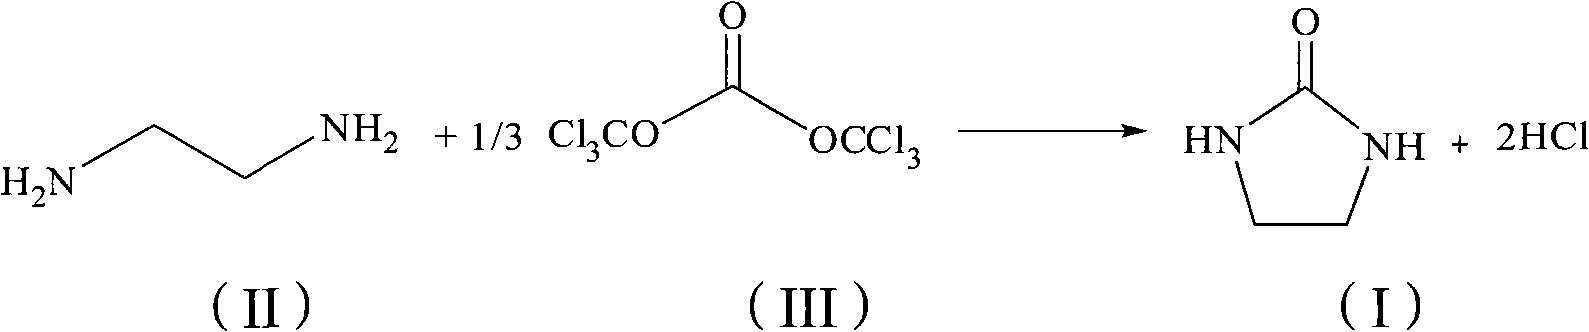 Chemical synthesis method for 2-imidazole alkyl ketone